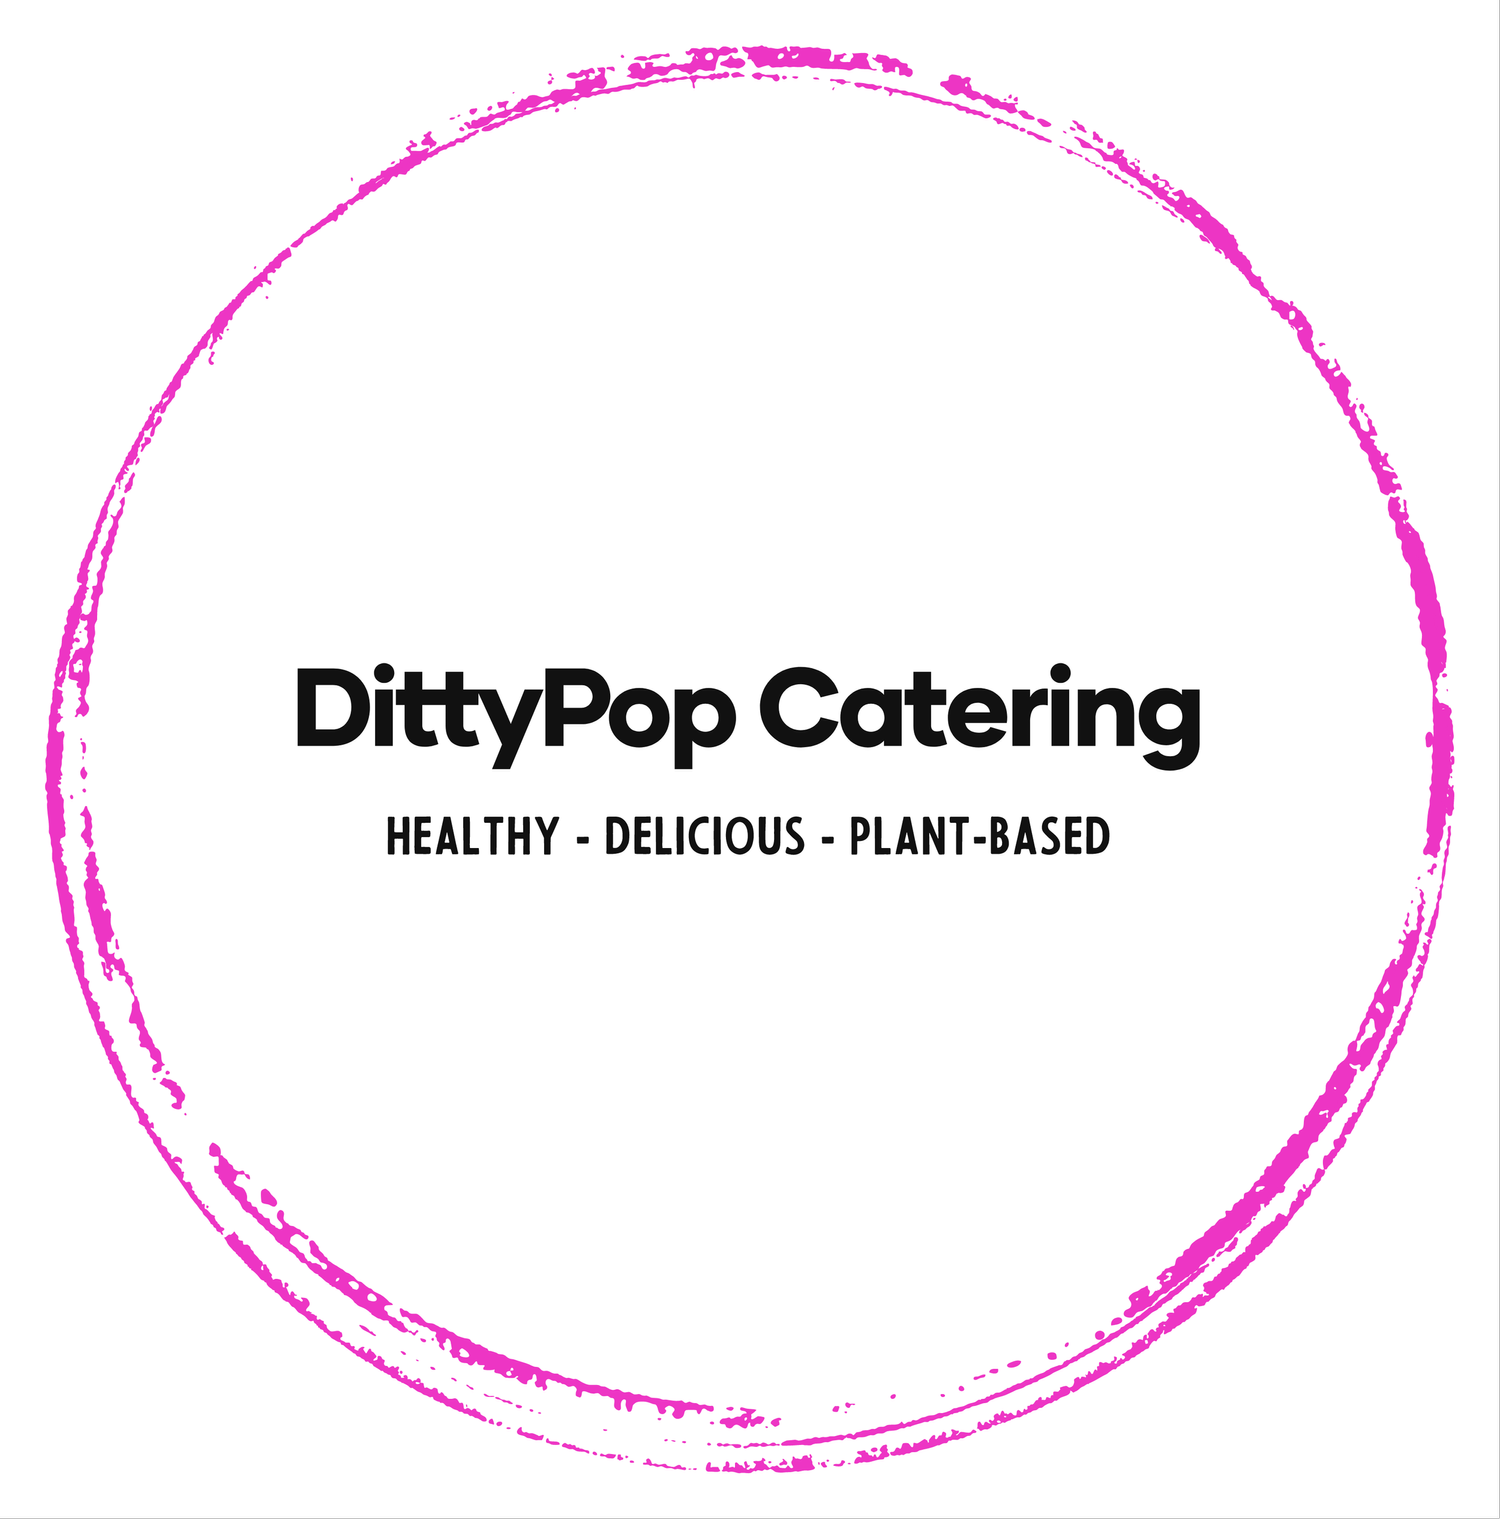 DittyPop Catering